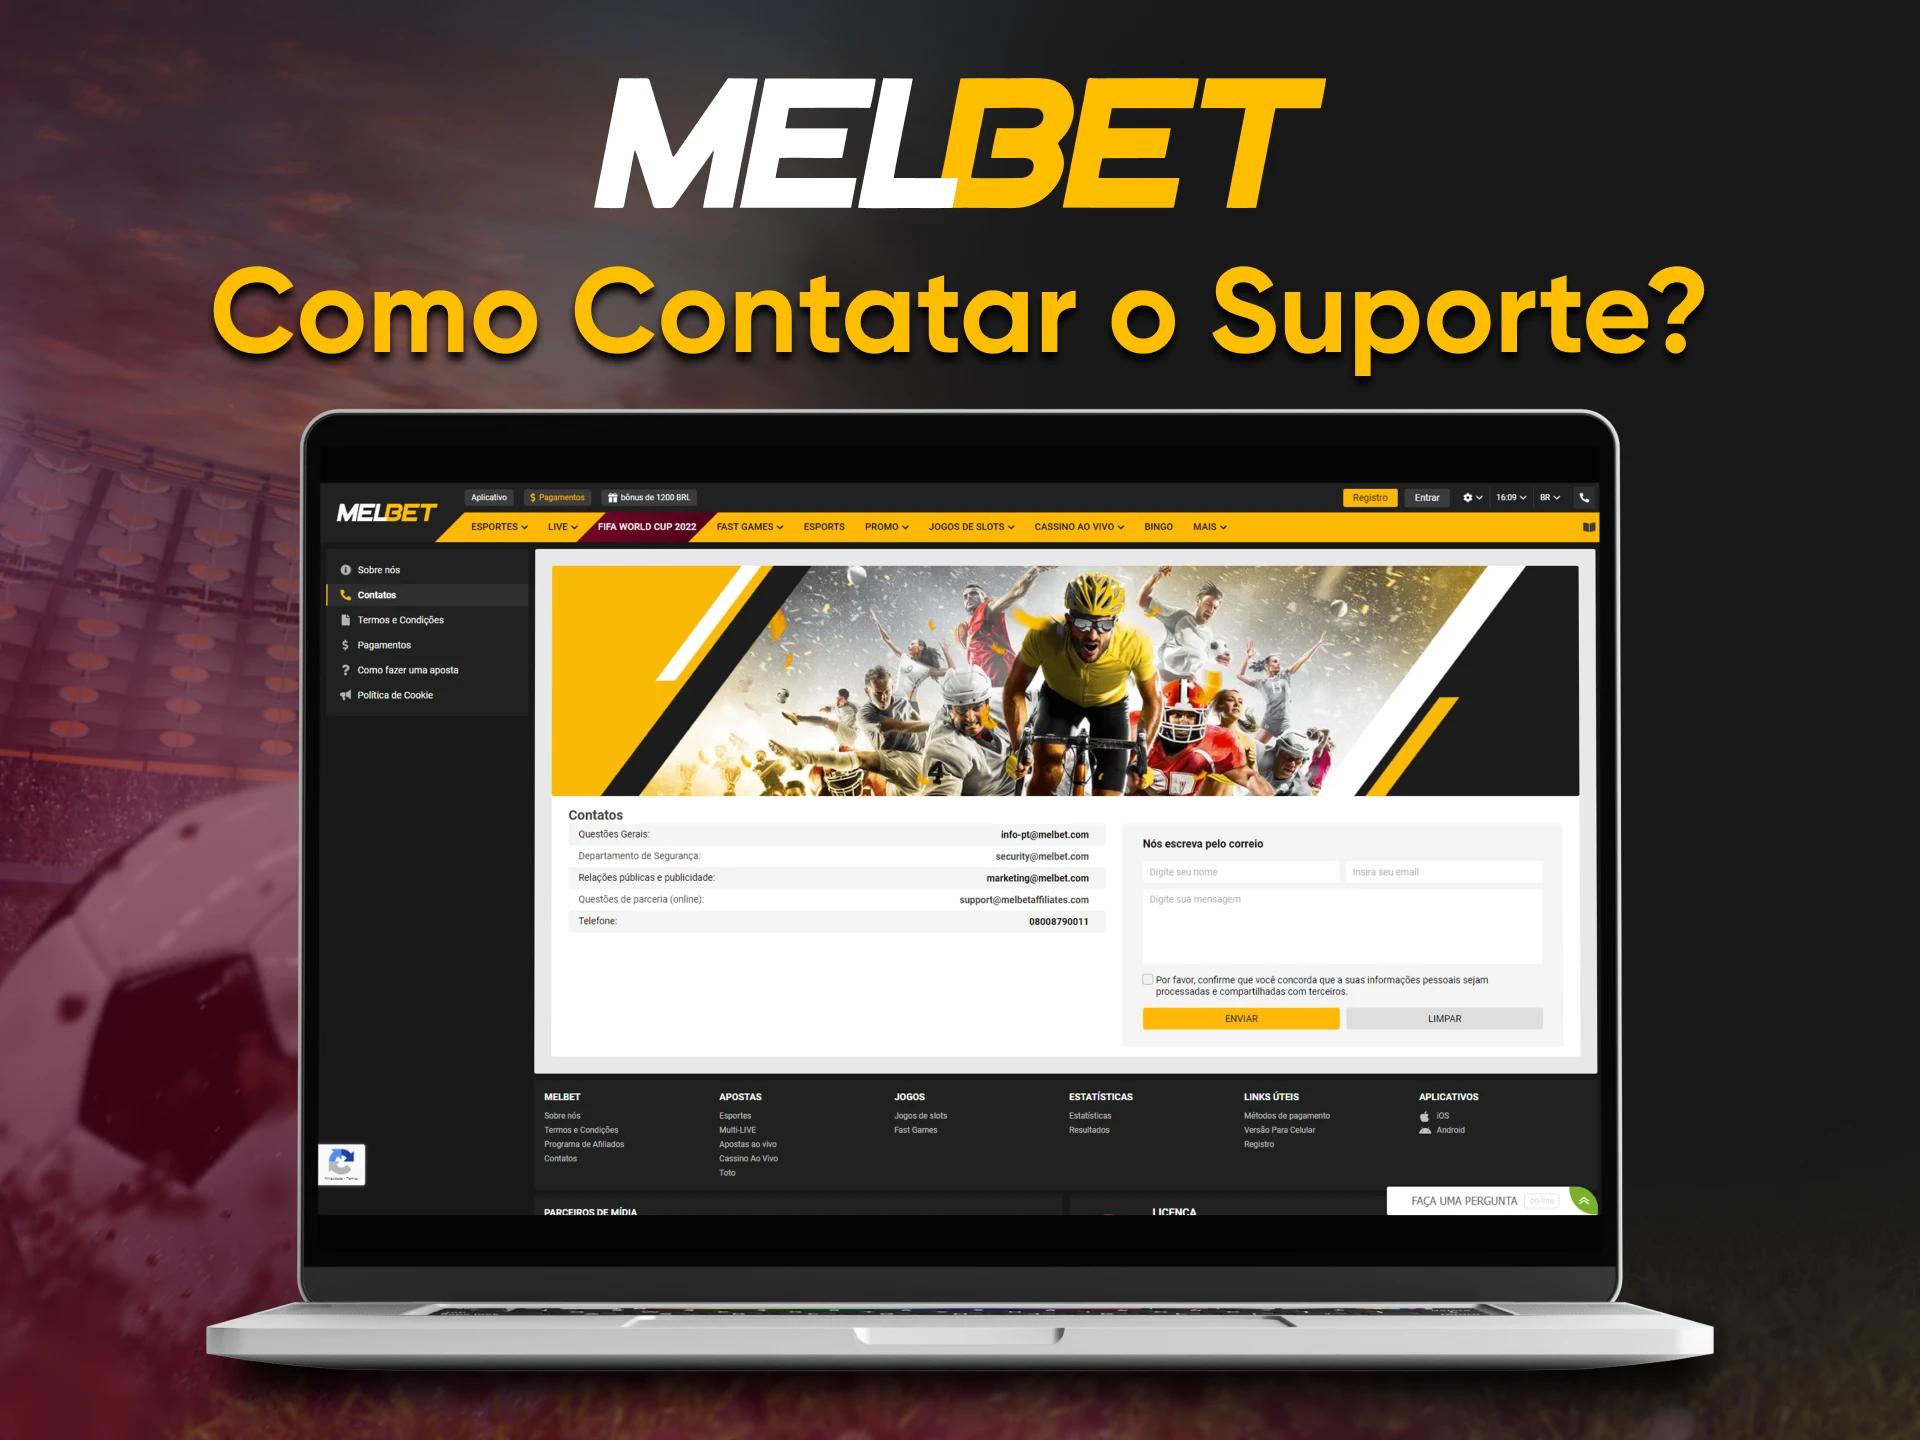 Visit the "Contacts" section to send a message to the Melbet team.